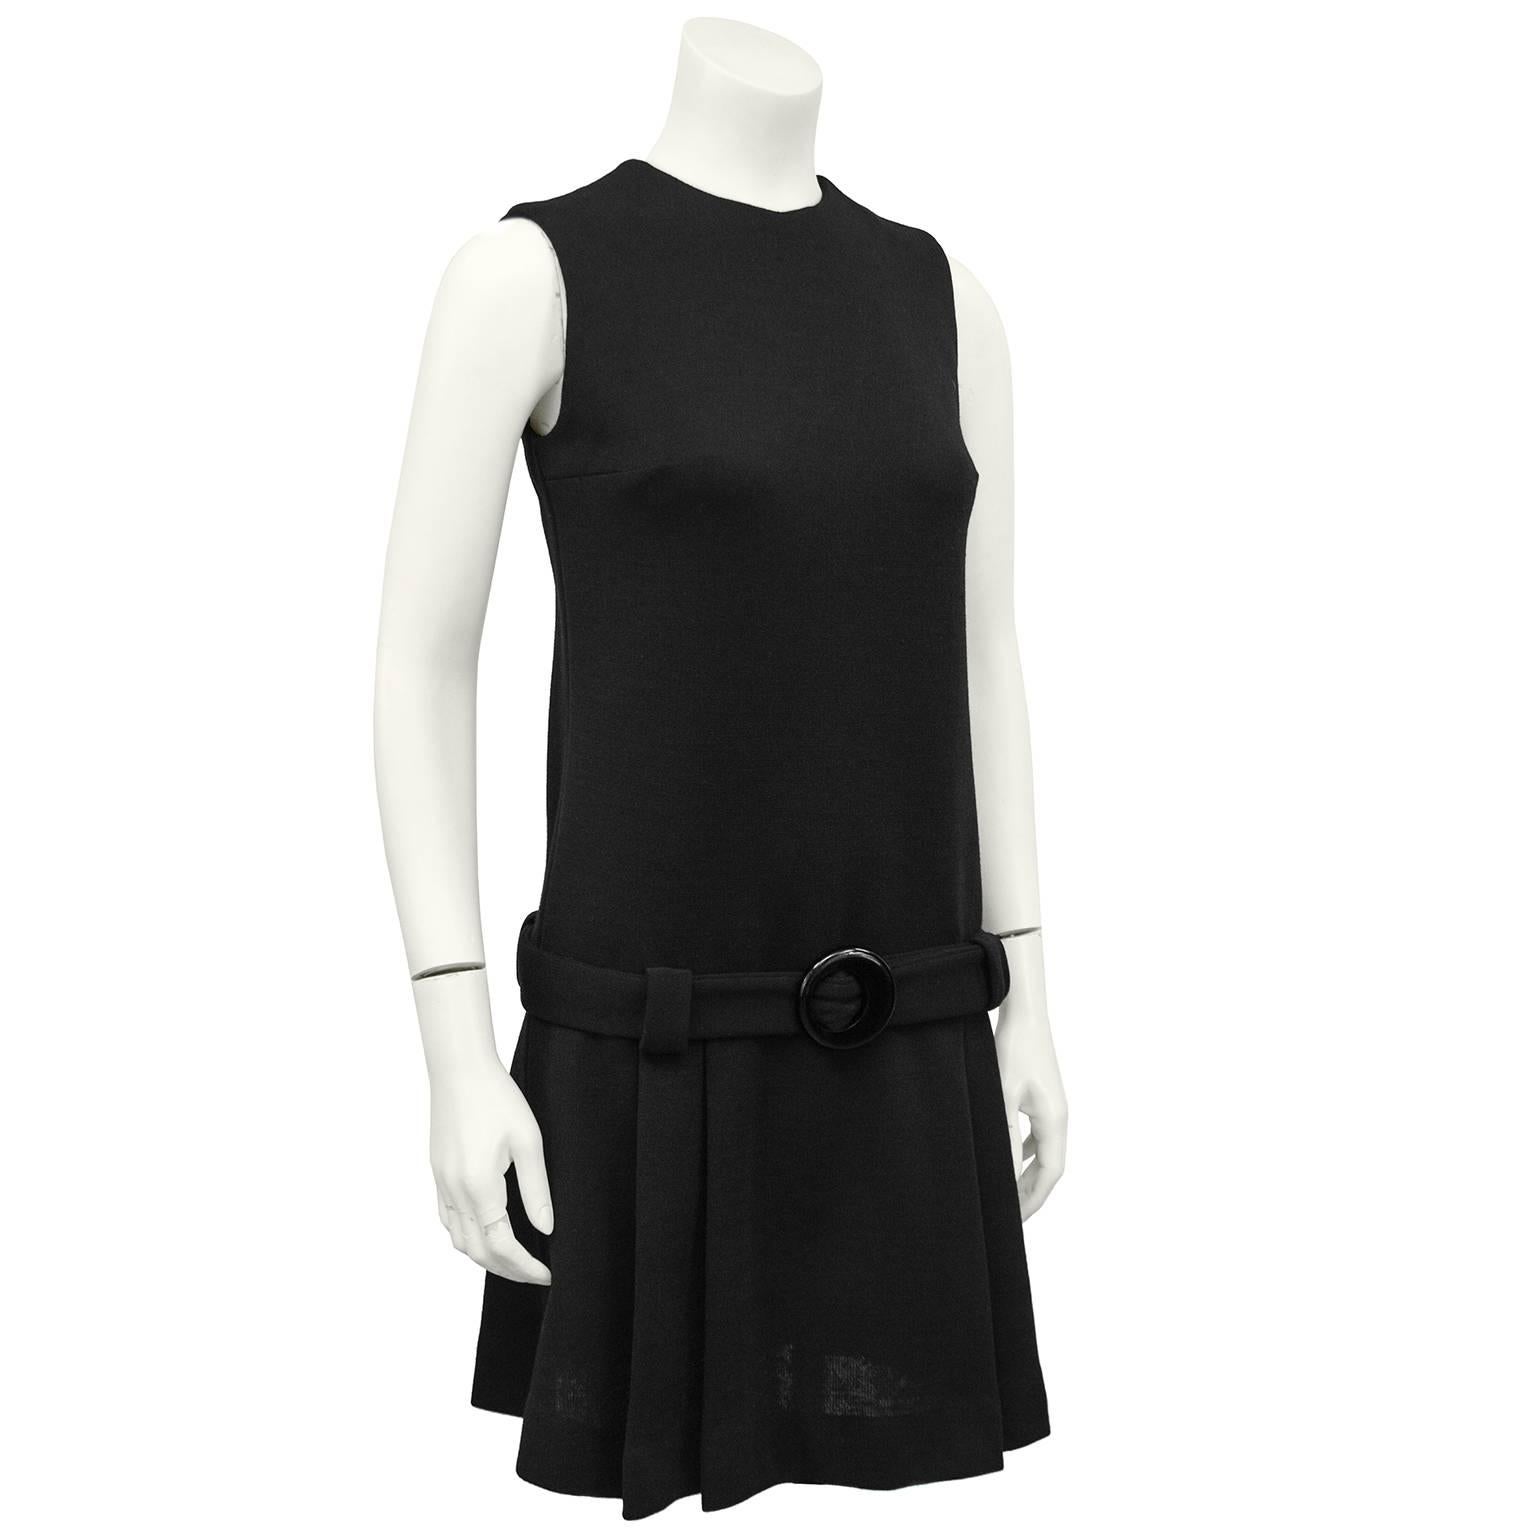 A classic LBD from the 1960s by American designer, Jonathan Logan. The sleeveless dress has a drop waist and a box pleated skirt. A matching black fabric belt at the dropped waist is accented with a black circular buckle. Zips up the back. In